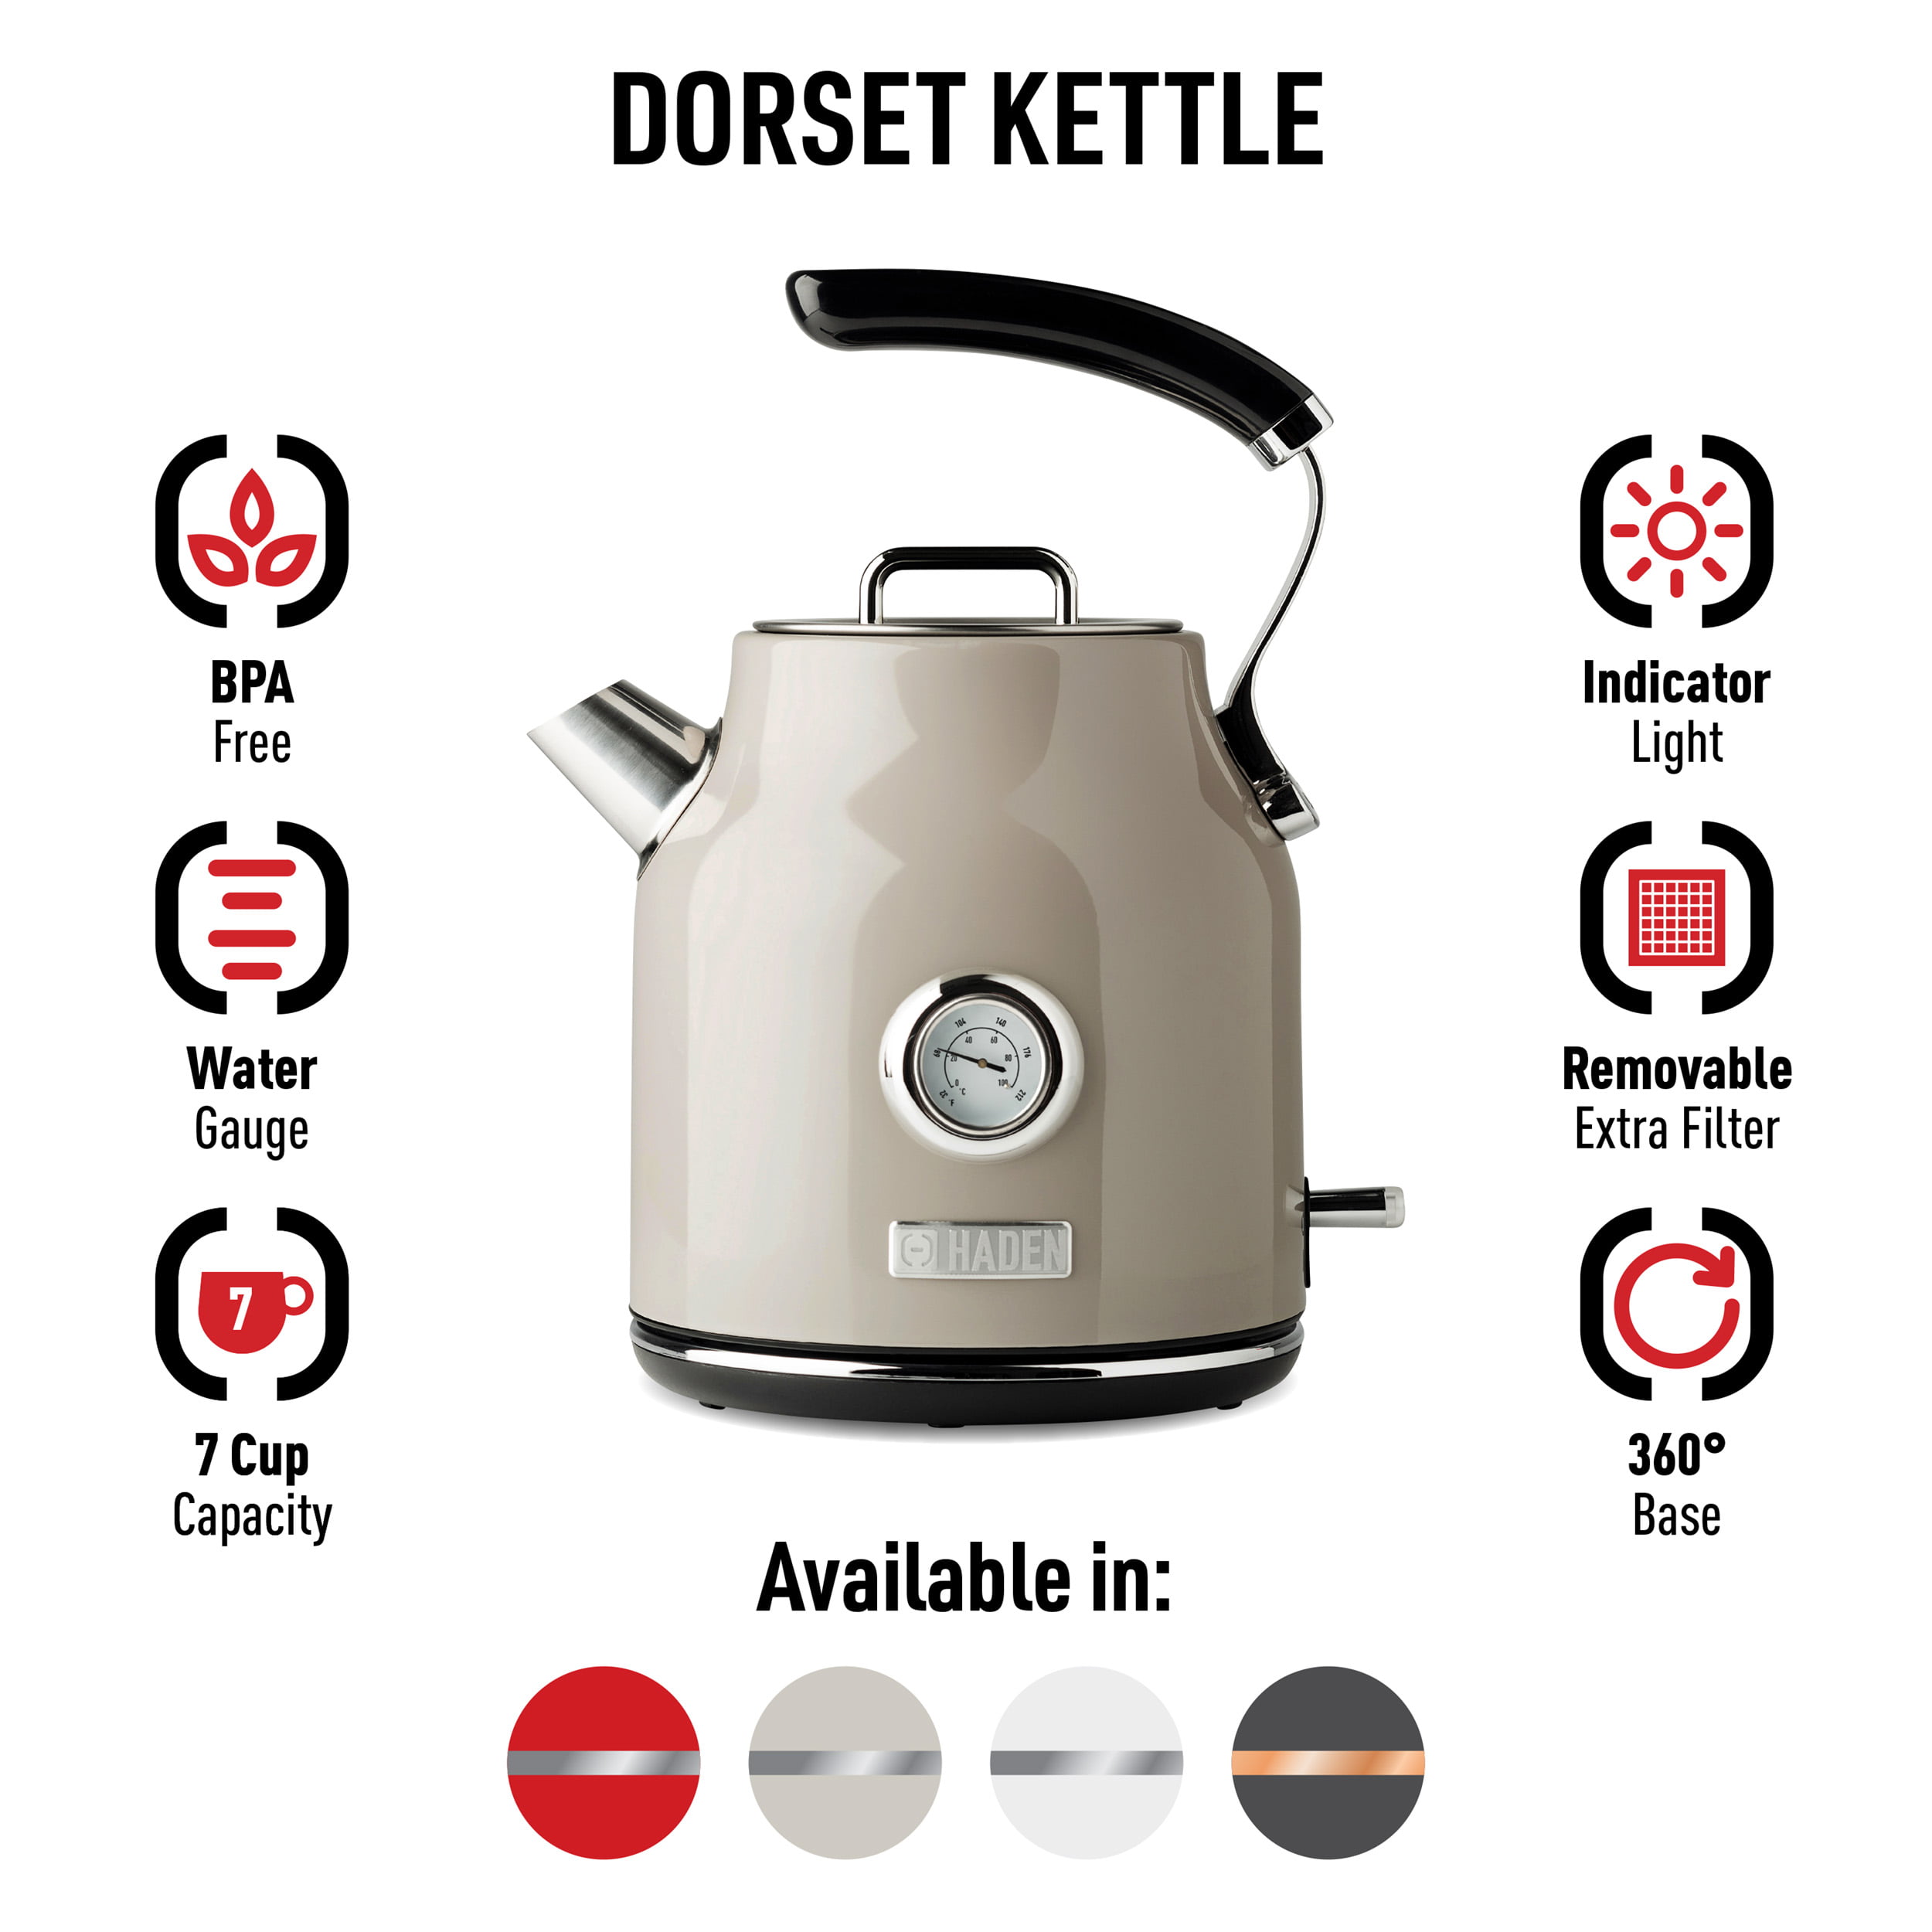 Haden Heritage Stainless Steel Electric Tea Kettle with Toaster,  Black/Copper, 1 Piece - City Market